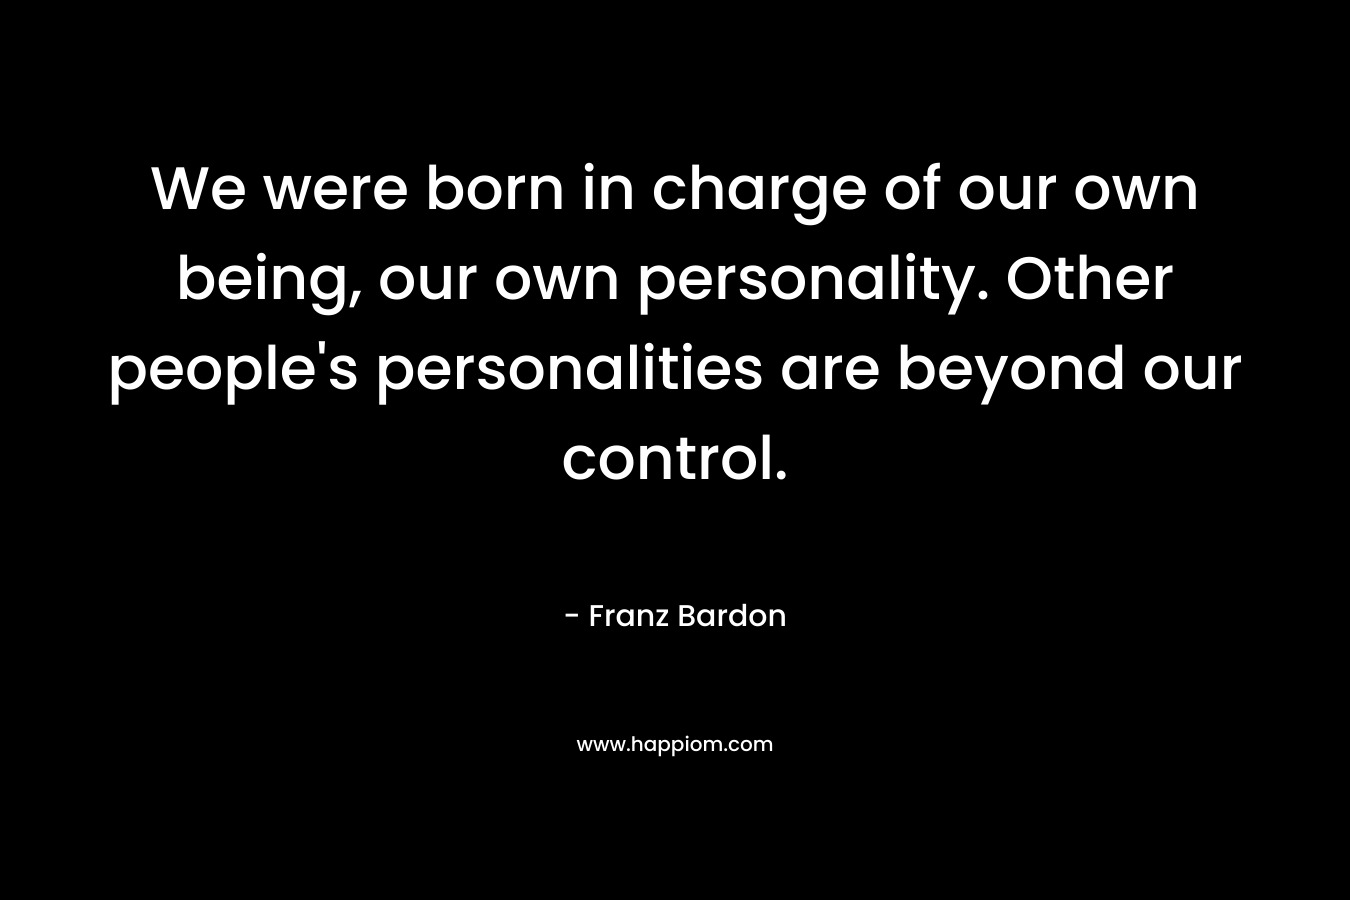 We were born in charge of our own being, our own personality. Other people’s personalities are beyond our control. – Franz Bardon